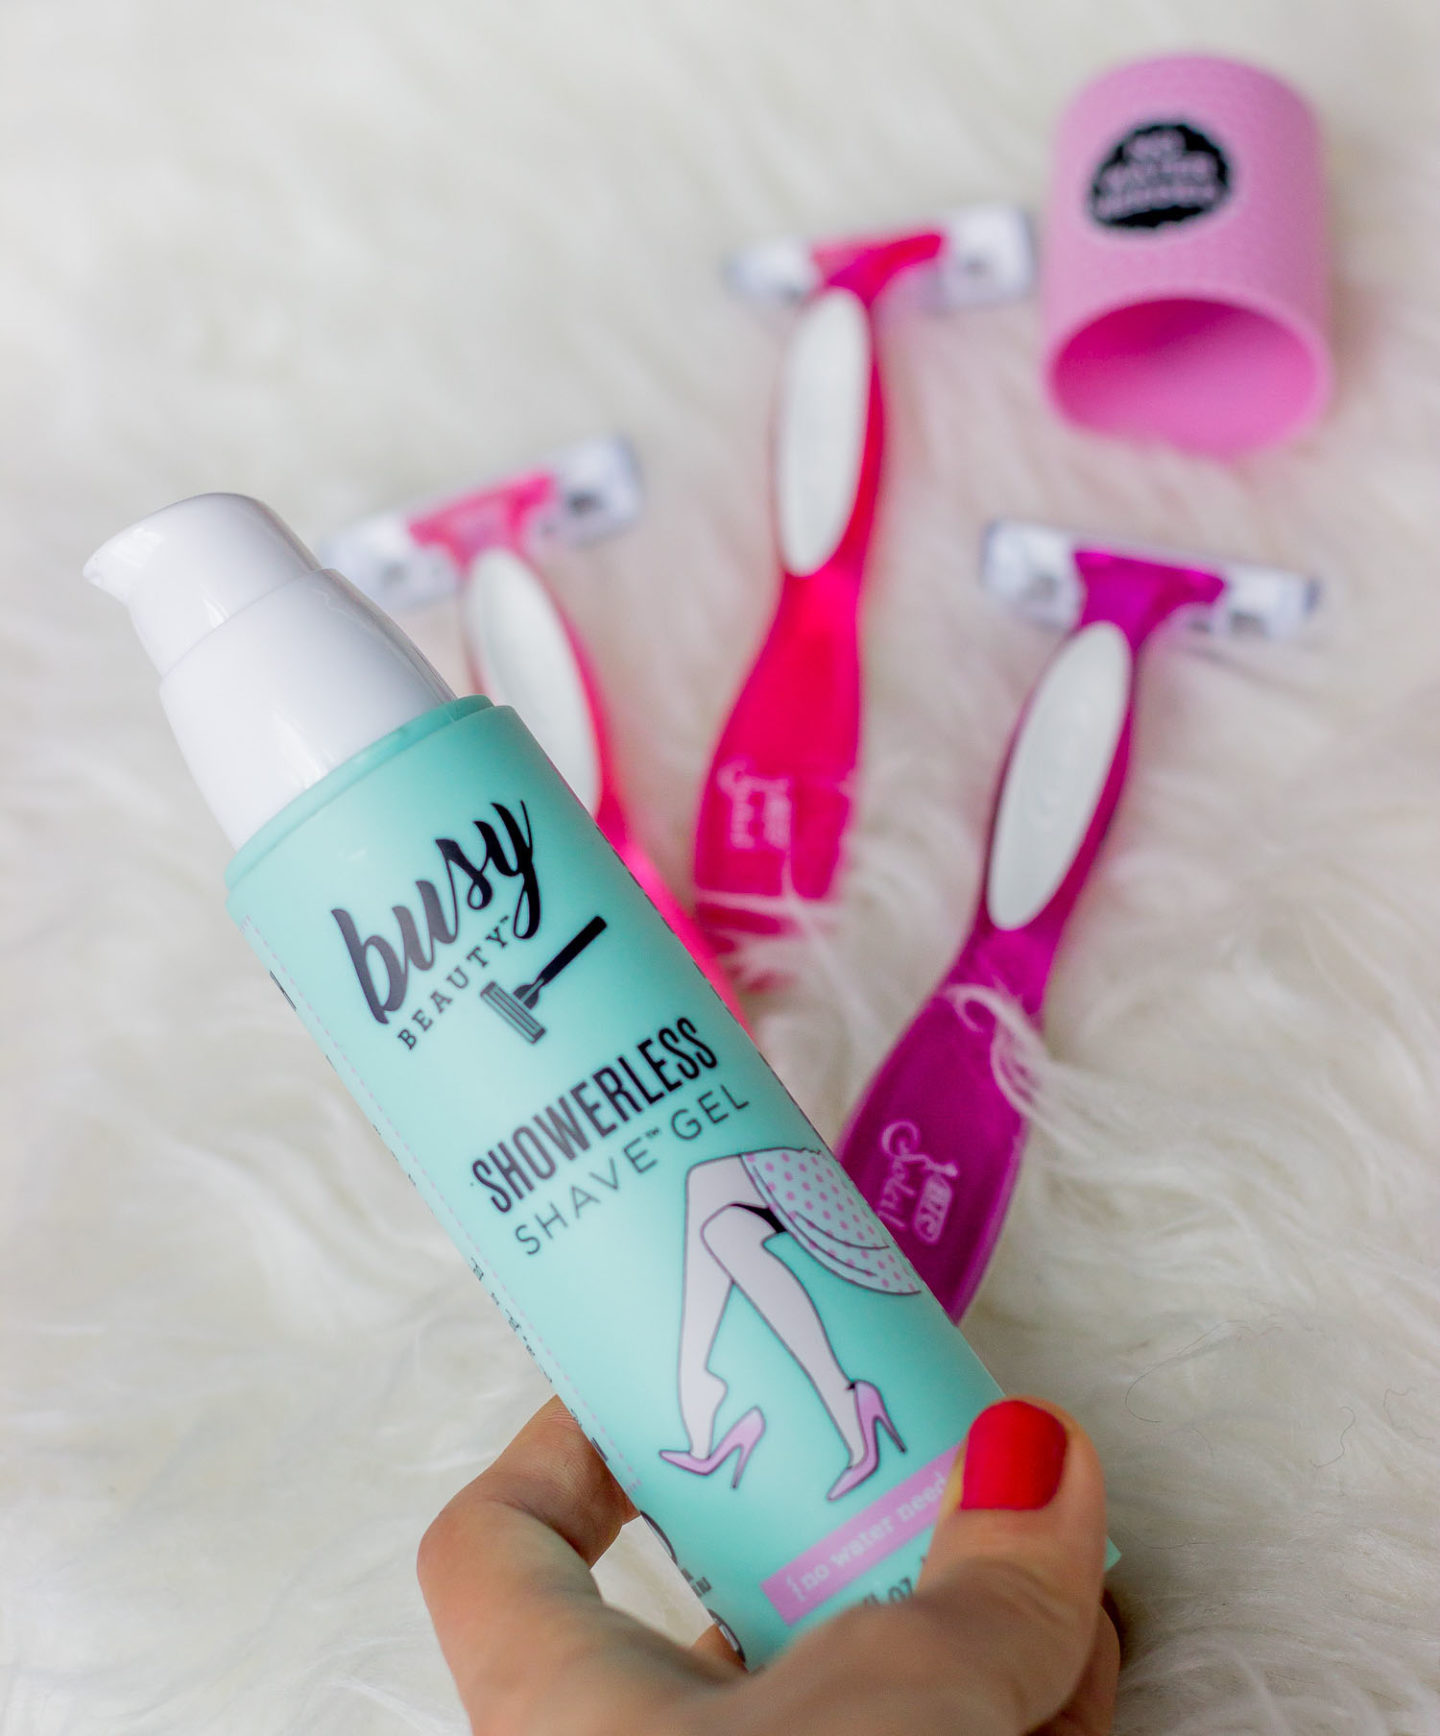 Busy Showerless Shave Gel on Belle Meets World blog